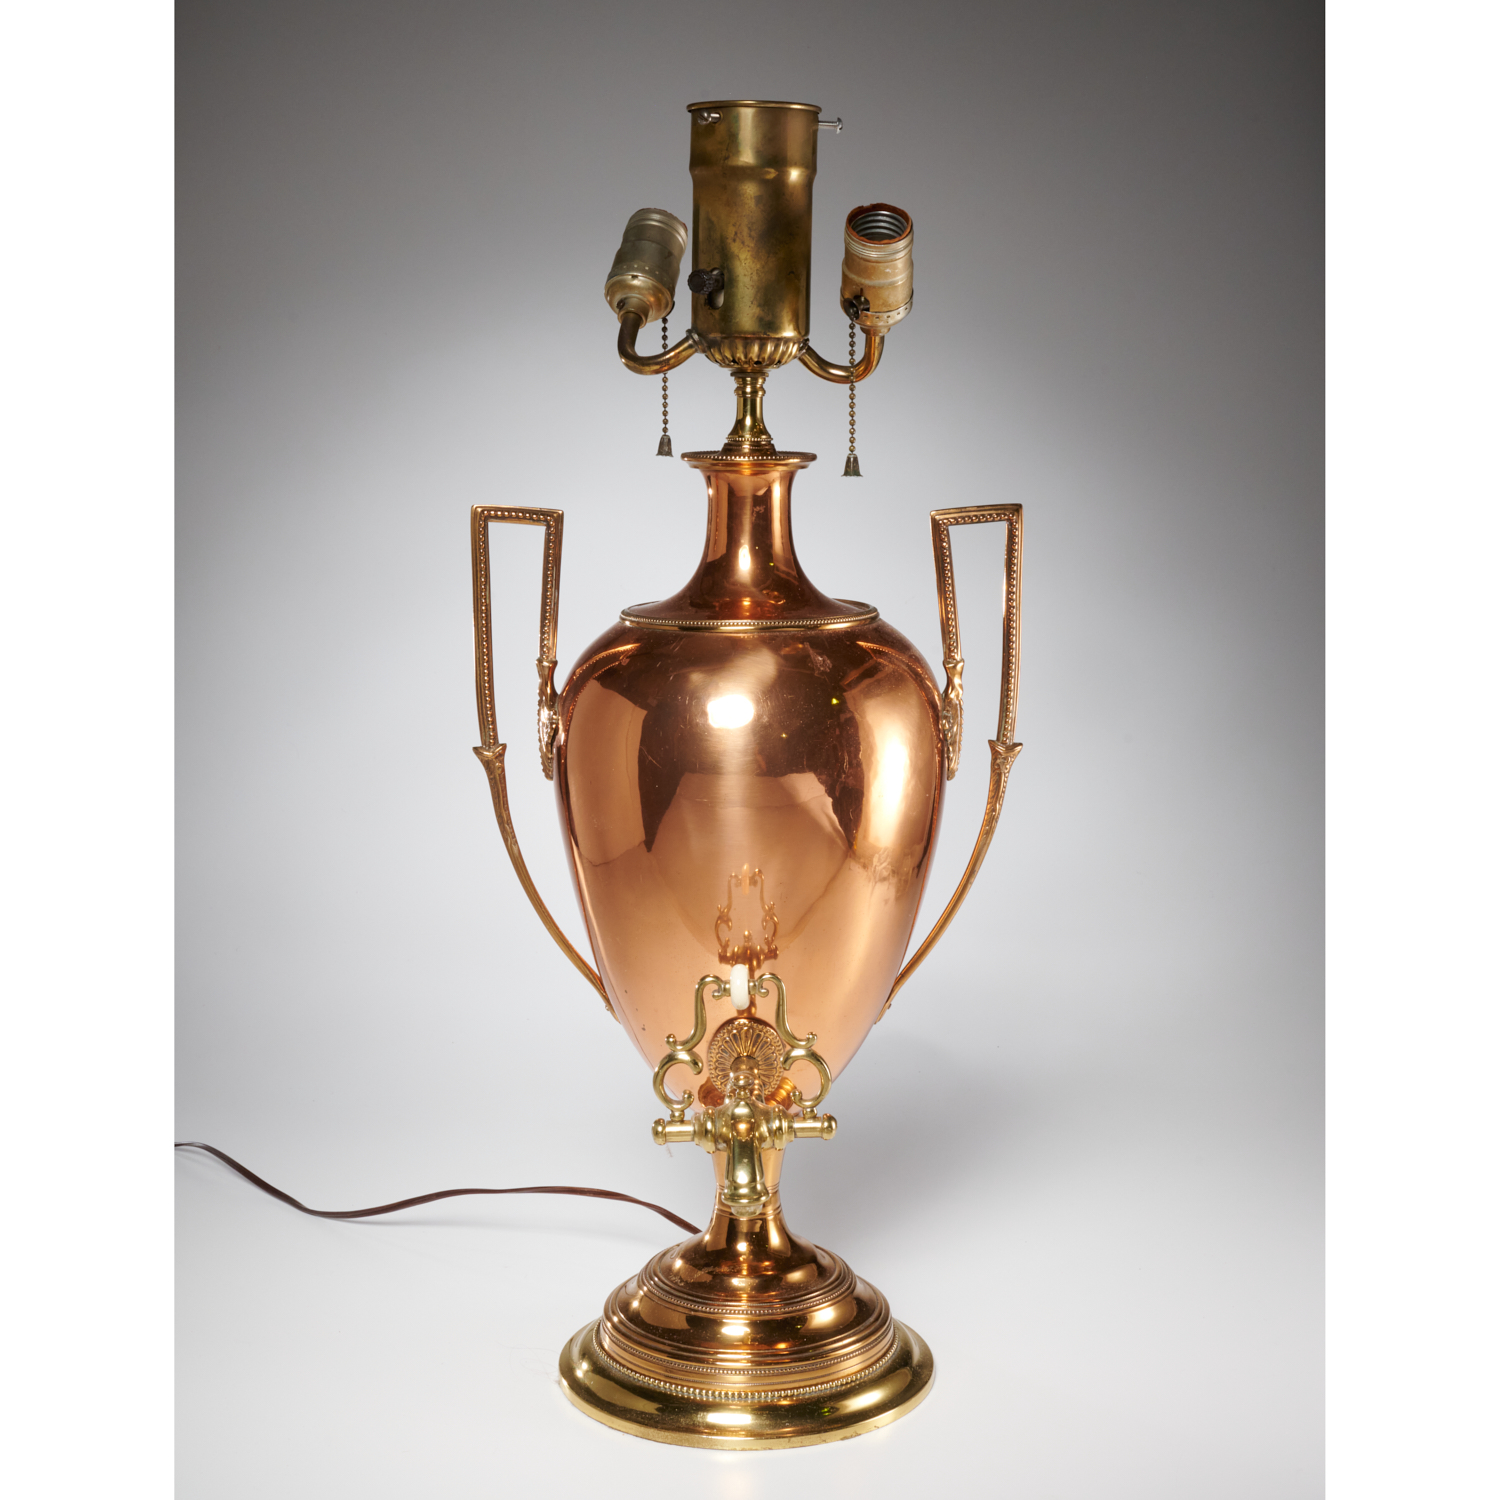 GEORGE III STYLE COPPER HOT WATER